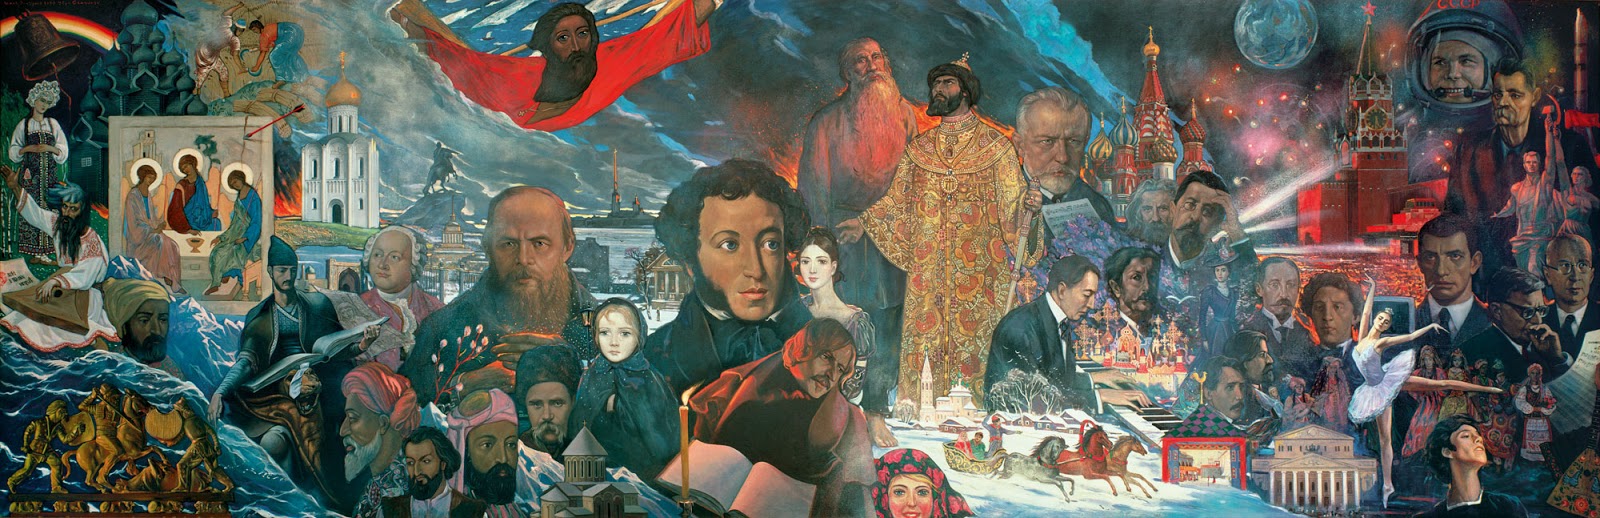 Ilya  Glazunov  The  Contribution  of  the  People  of  the  USSR  to  World  Culture  and  Civilization